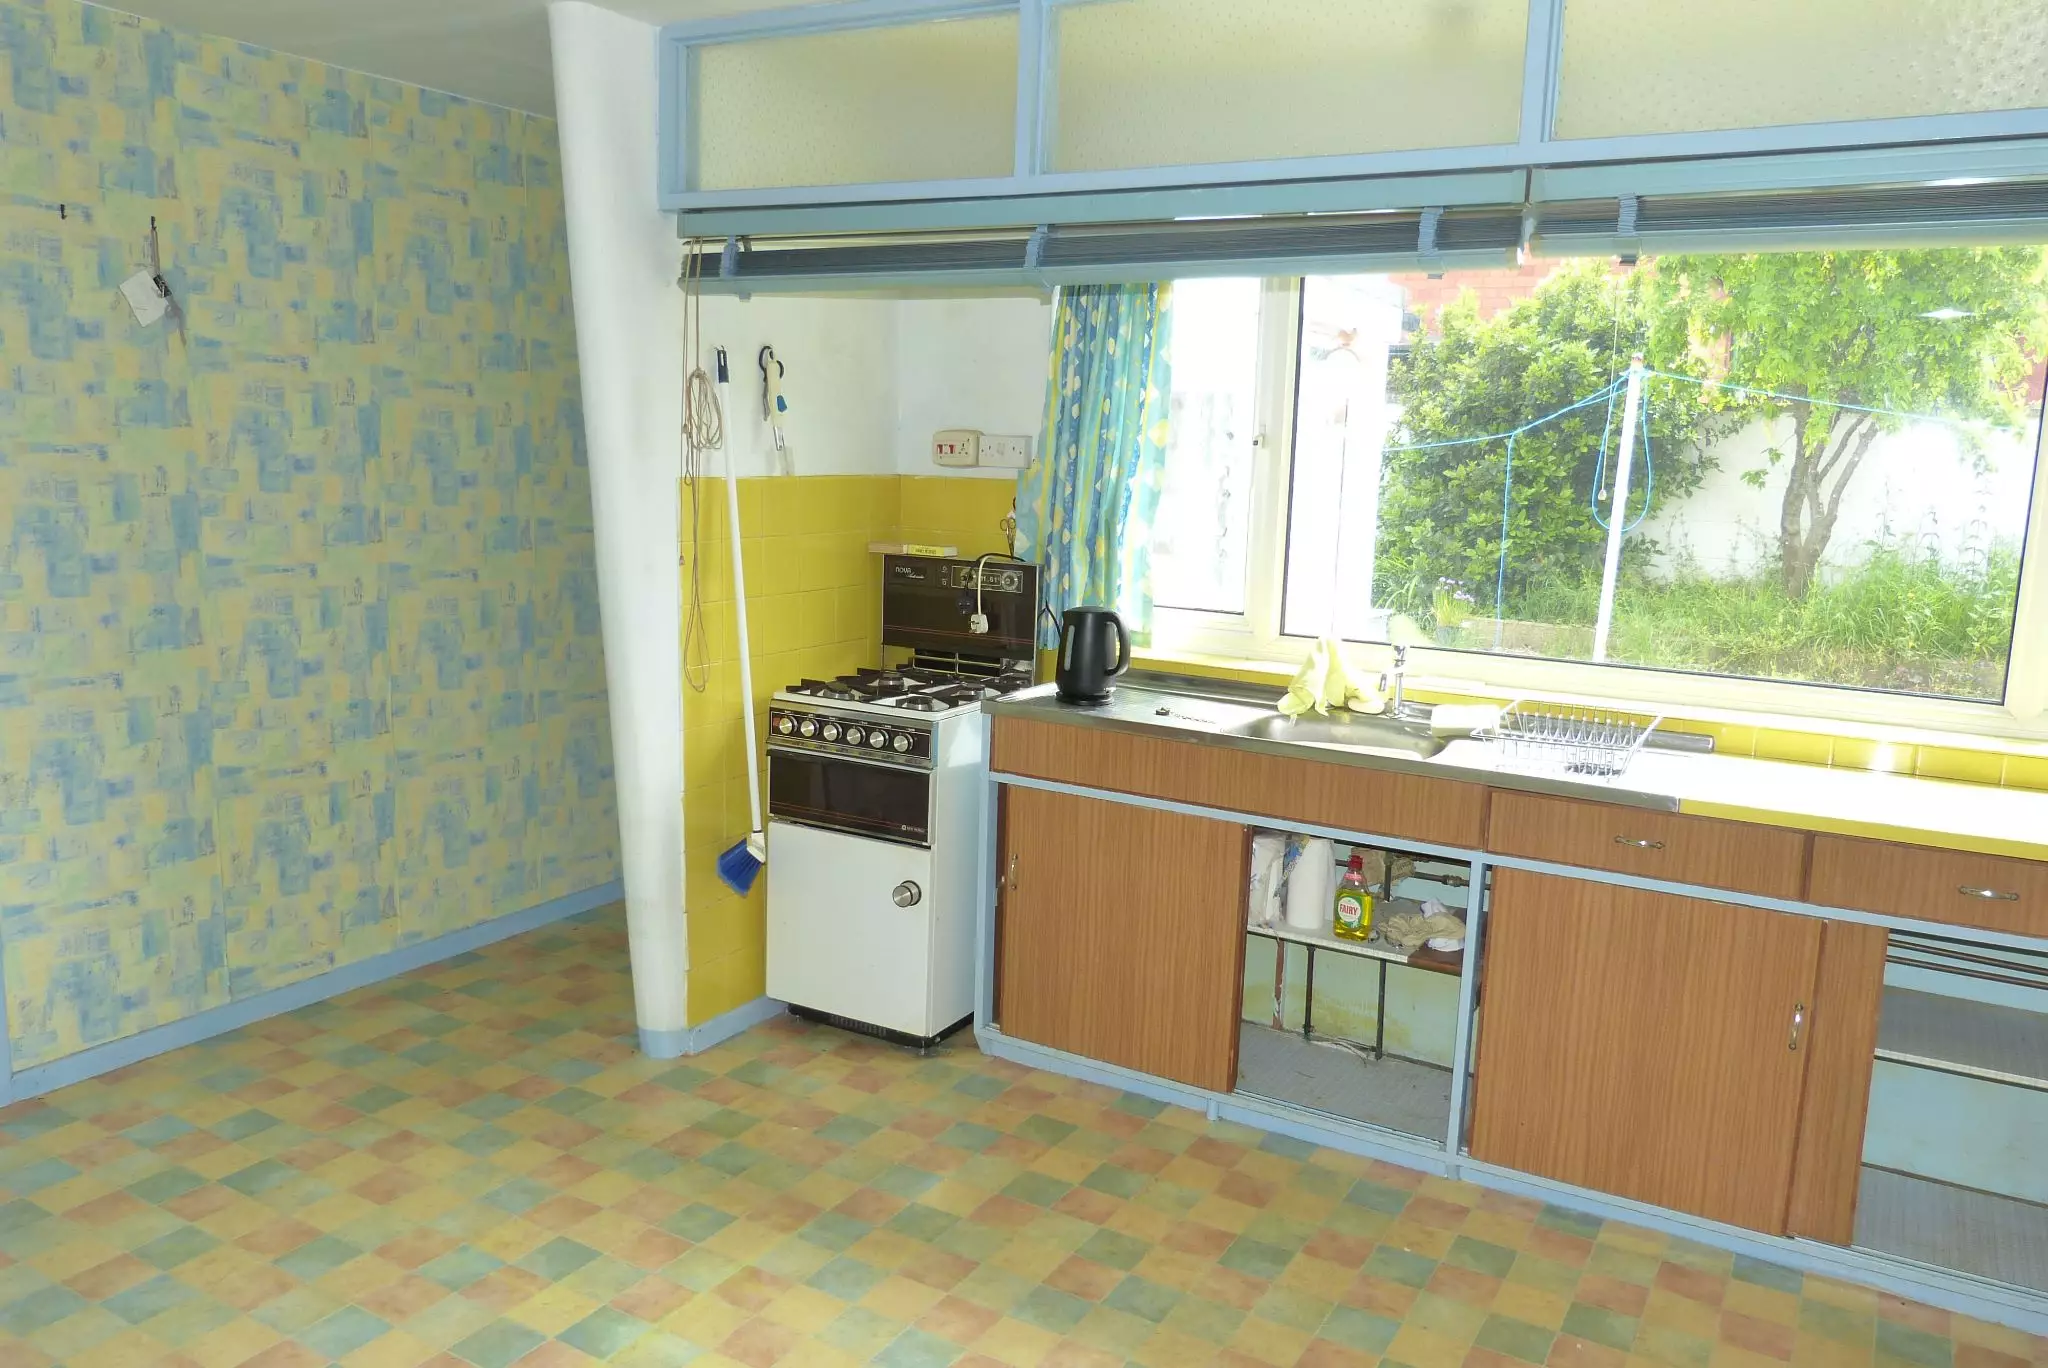 The kitchen has retro units and a hatch through into the dining room.